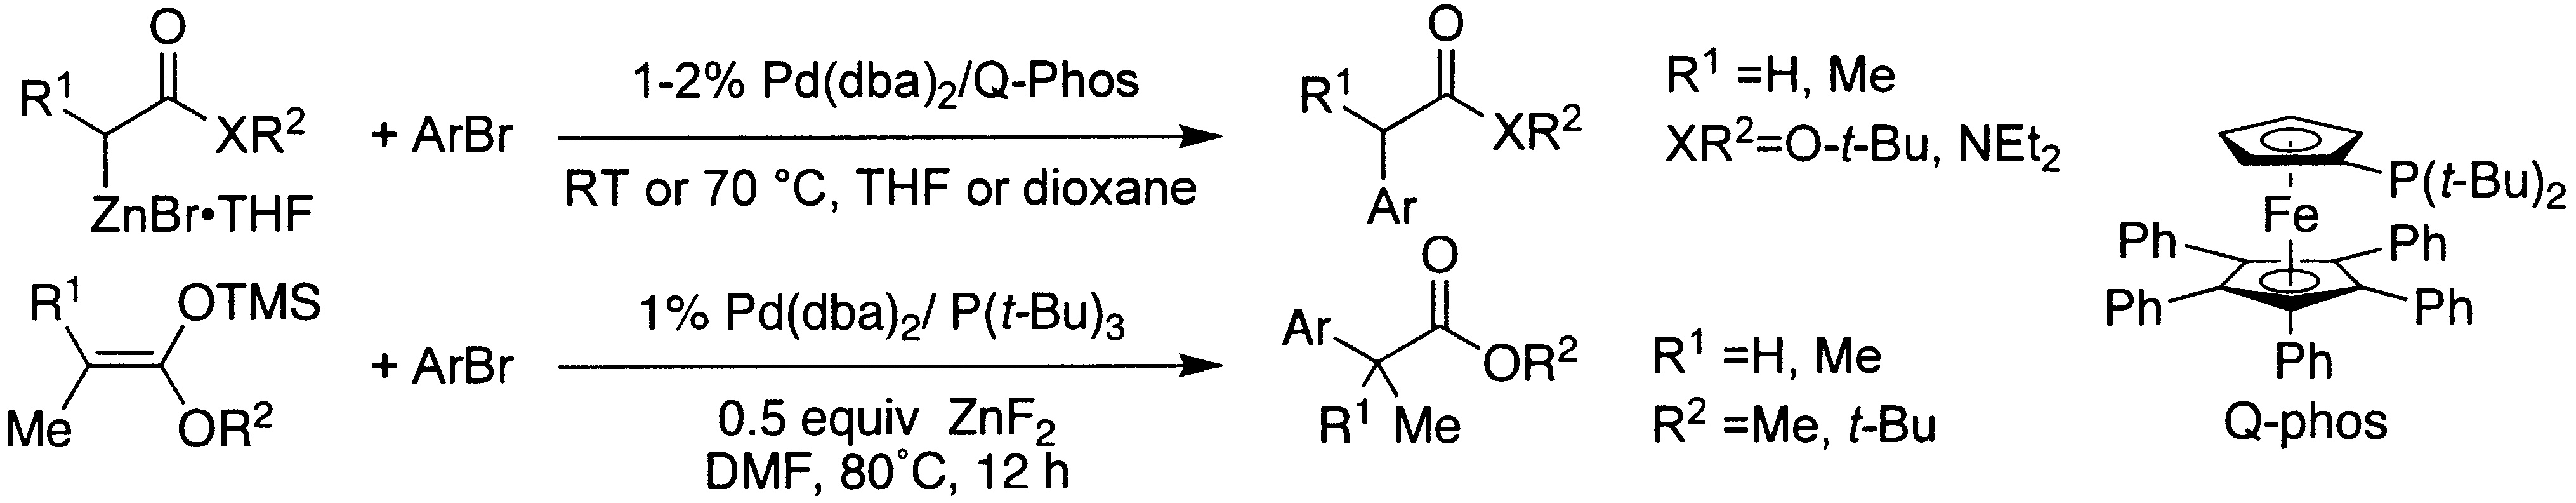 Palladium-Catalyzed a-Arylation of Esters and Amides under More Neutral Conditions